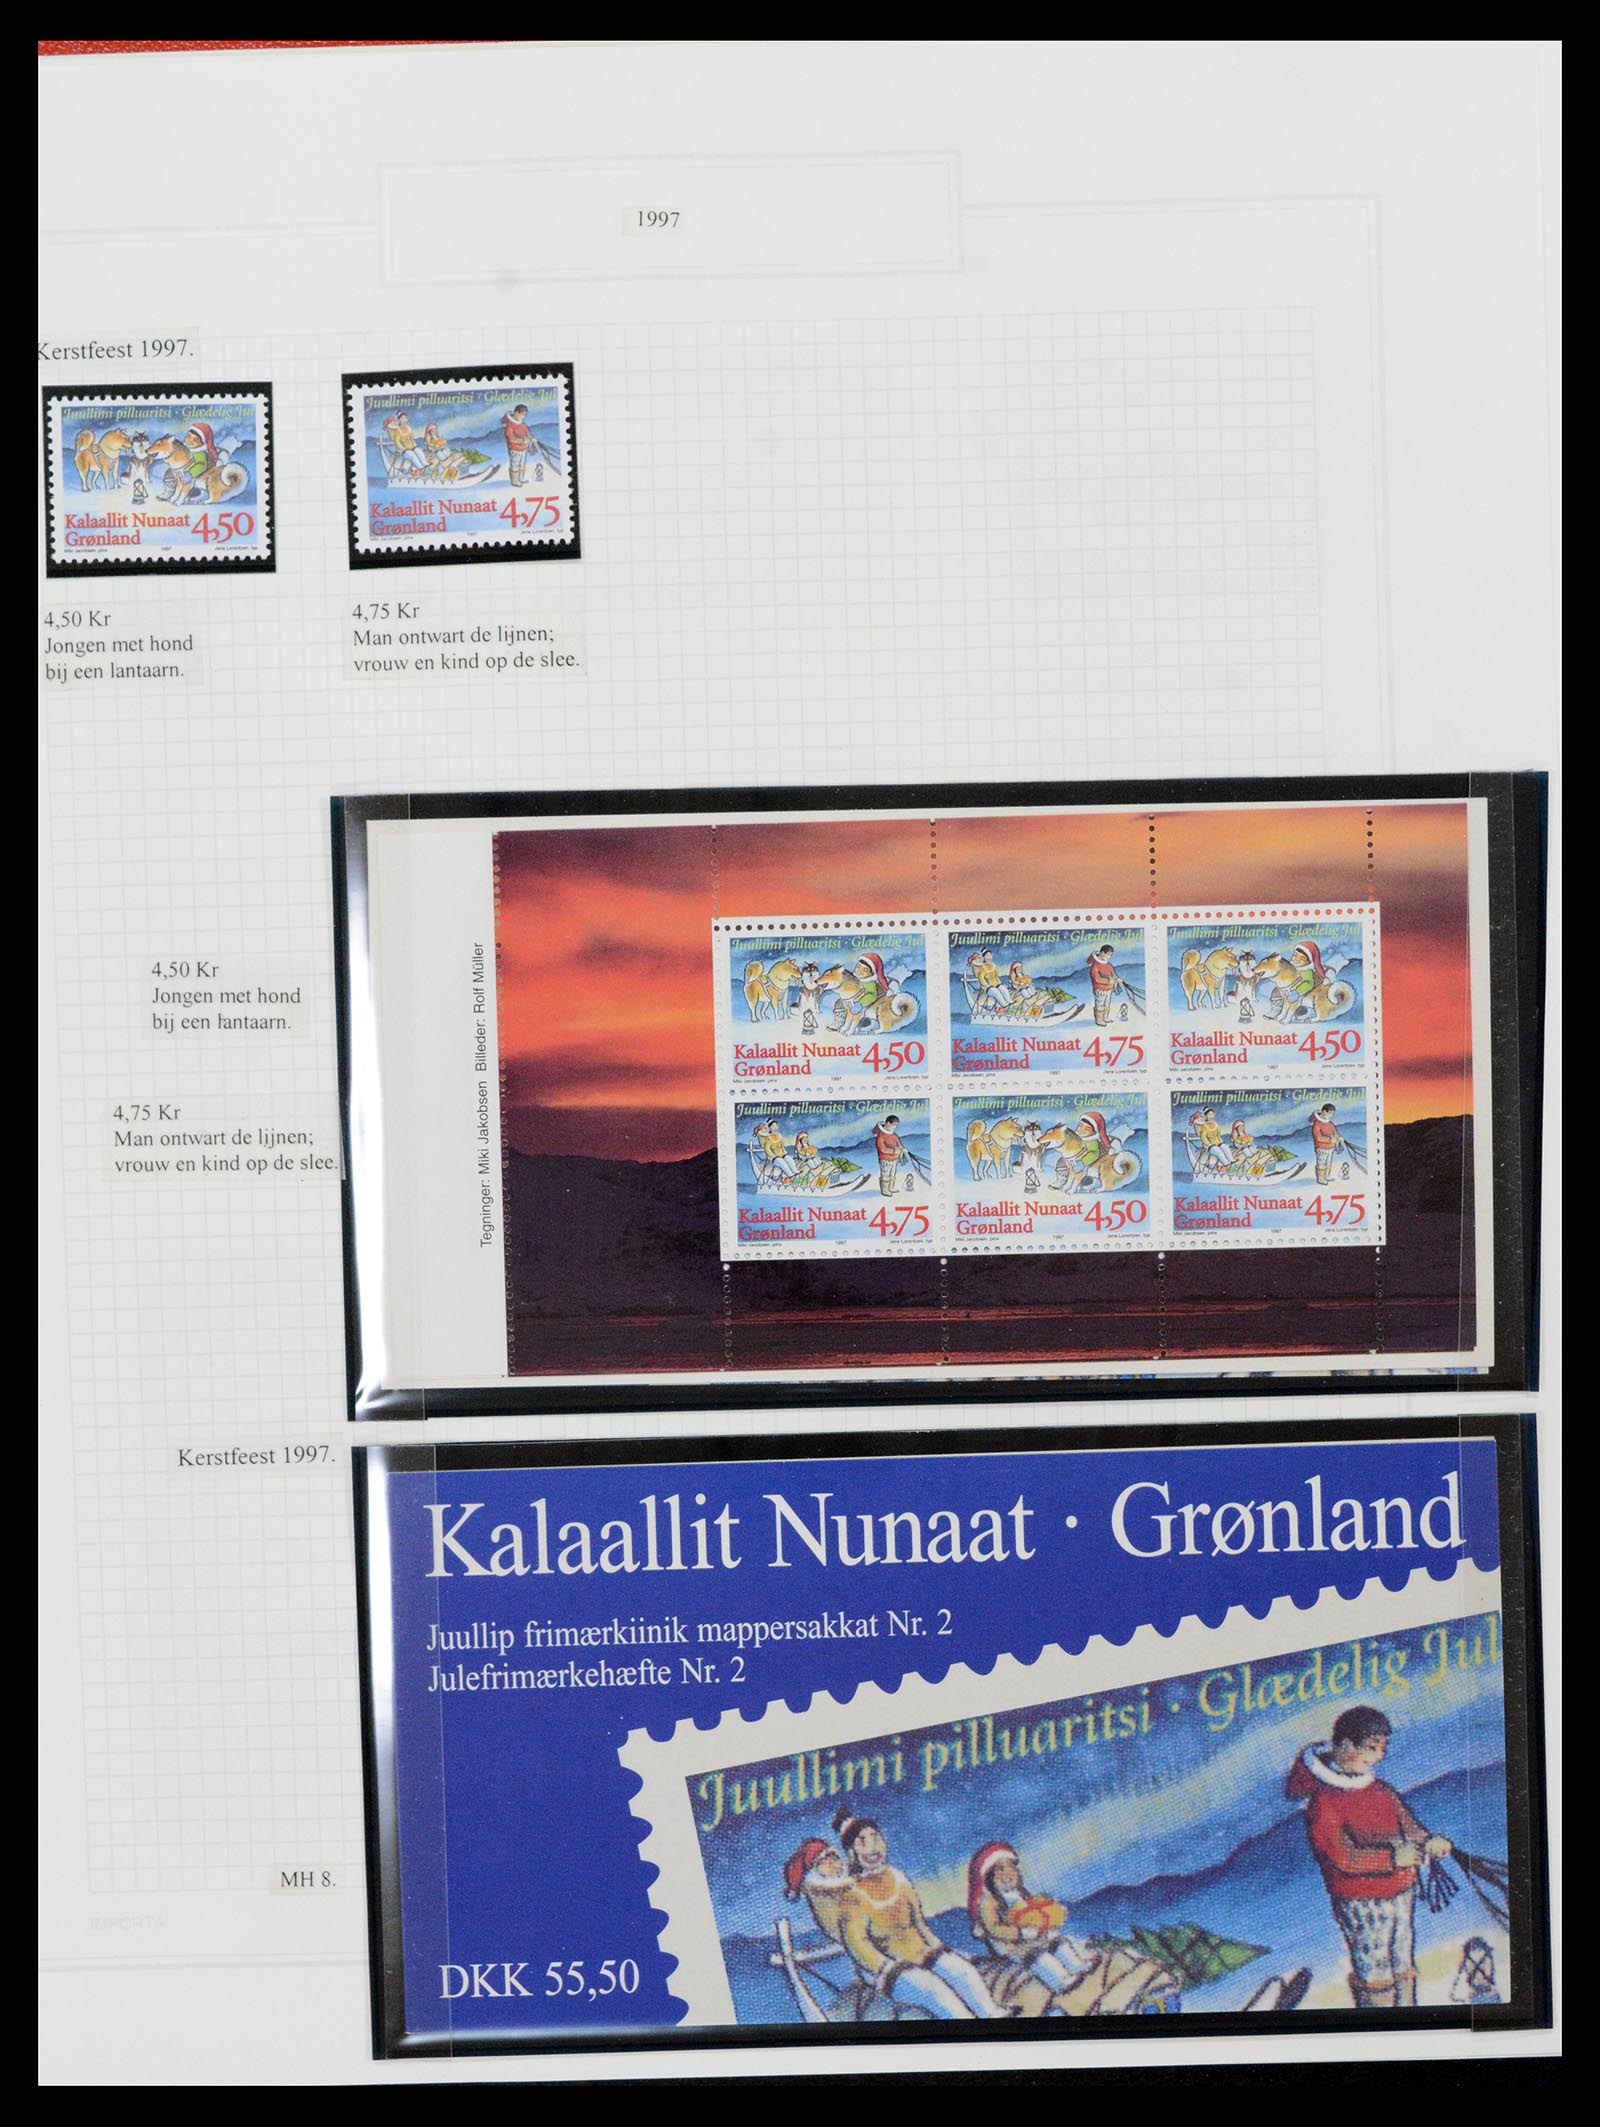 37302 096 - Stamp collection 37302 Greenland and Faroe Islands 1905-2001.